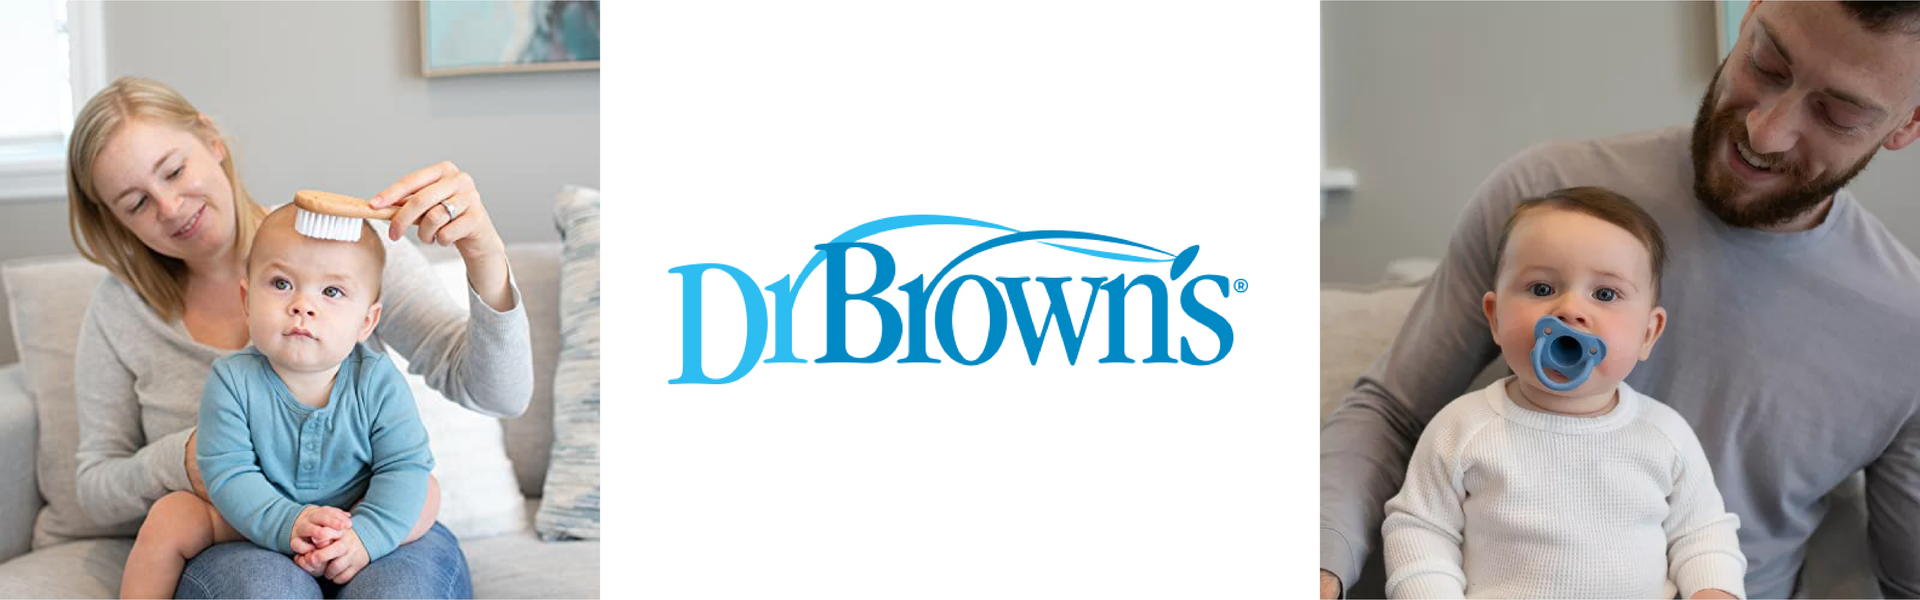 Dr. Brown's